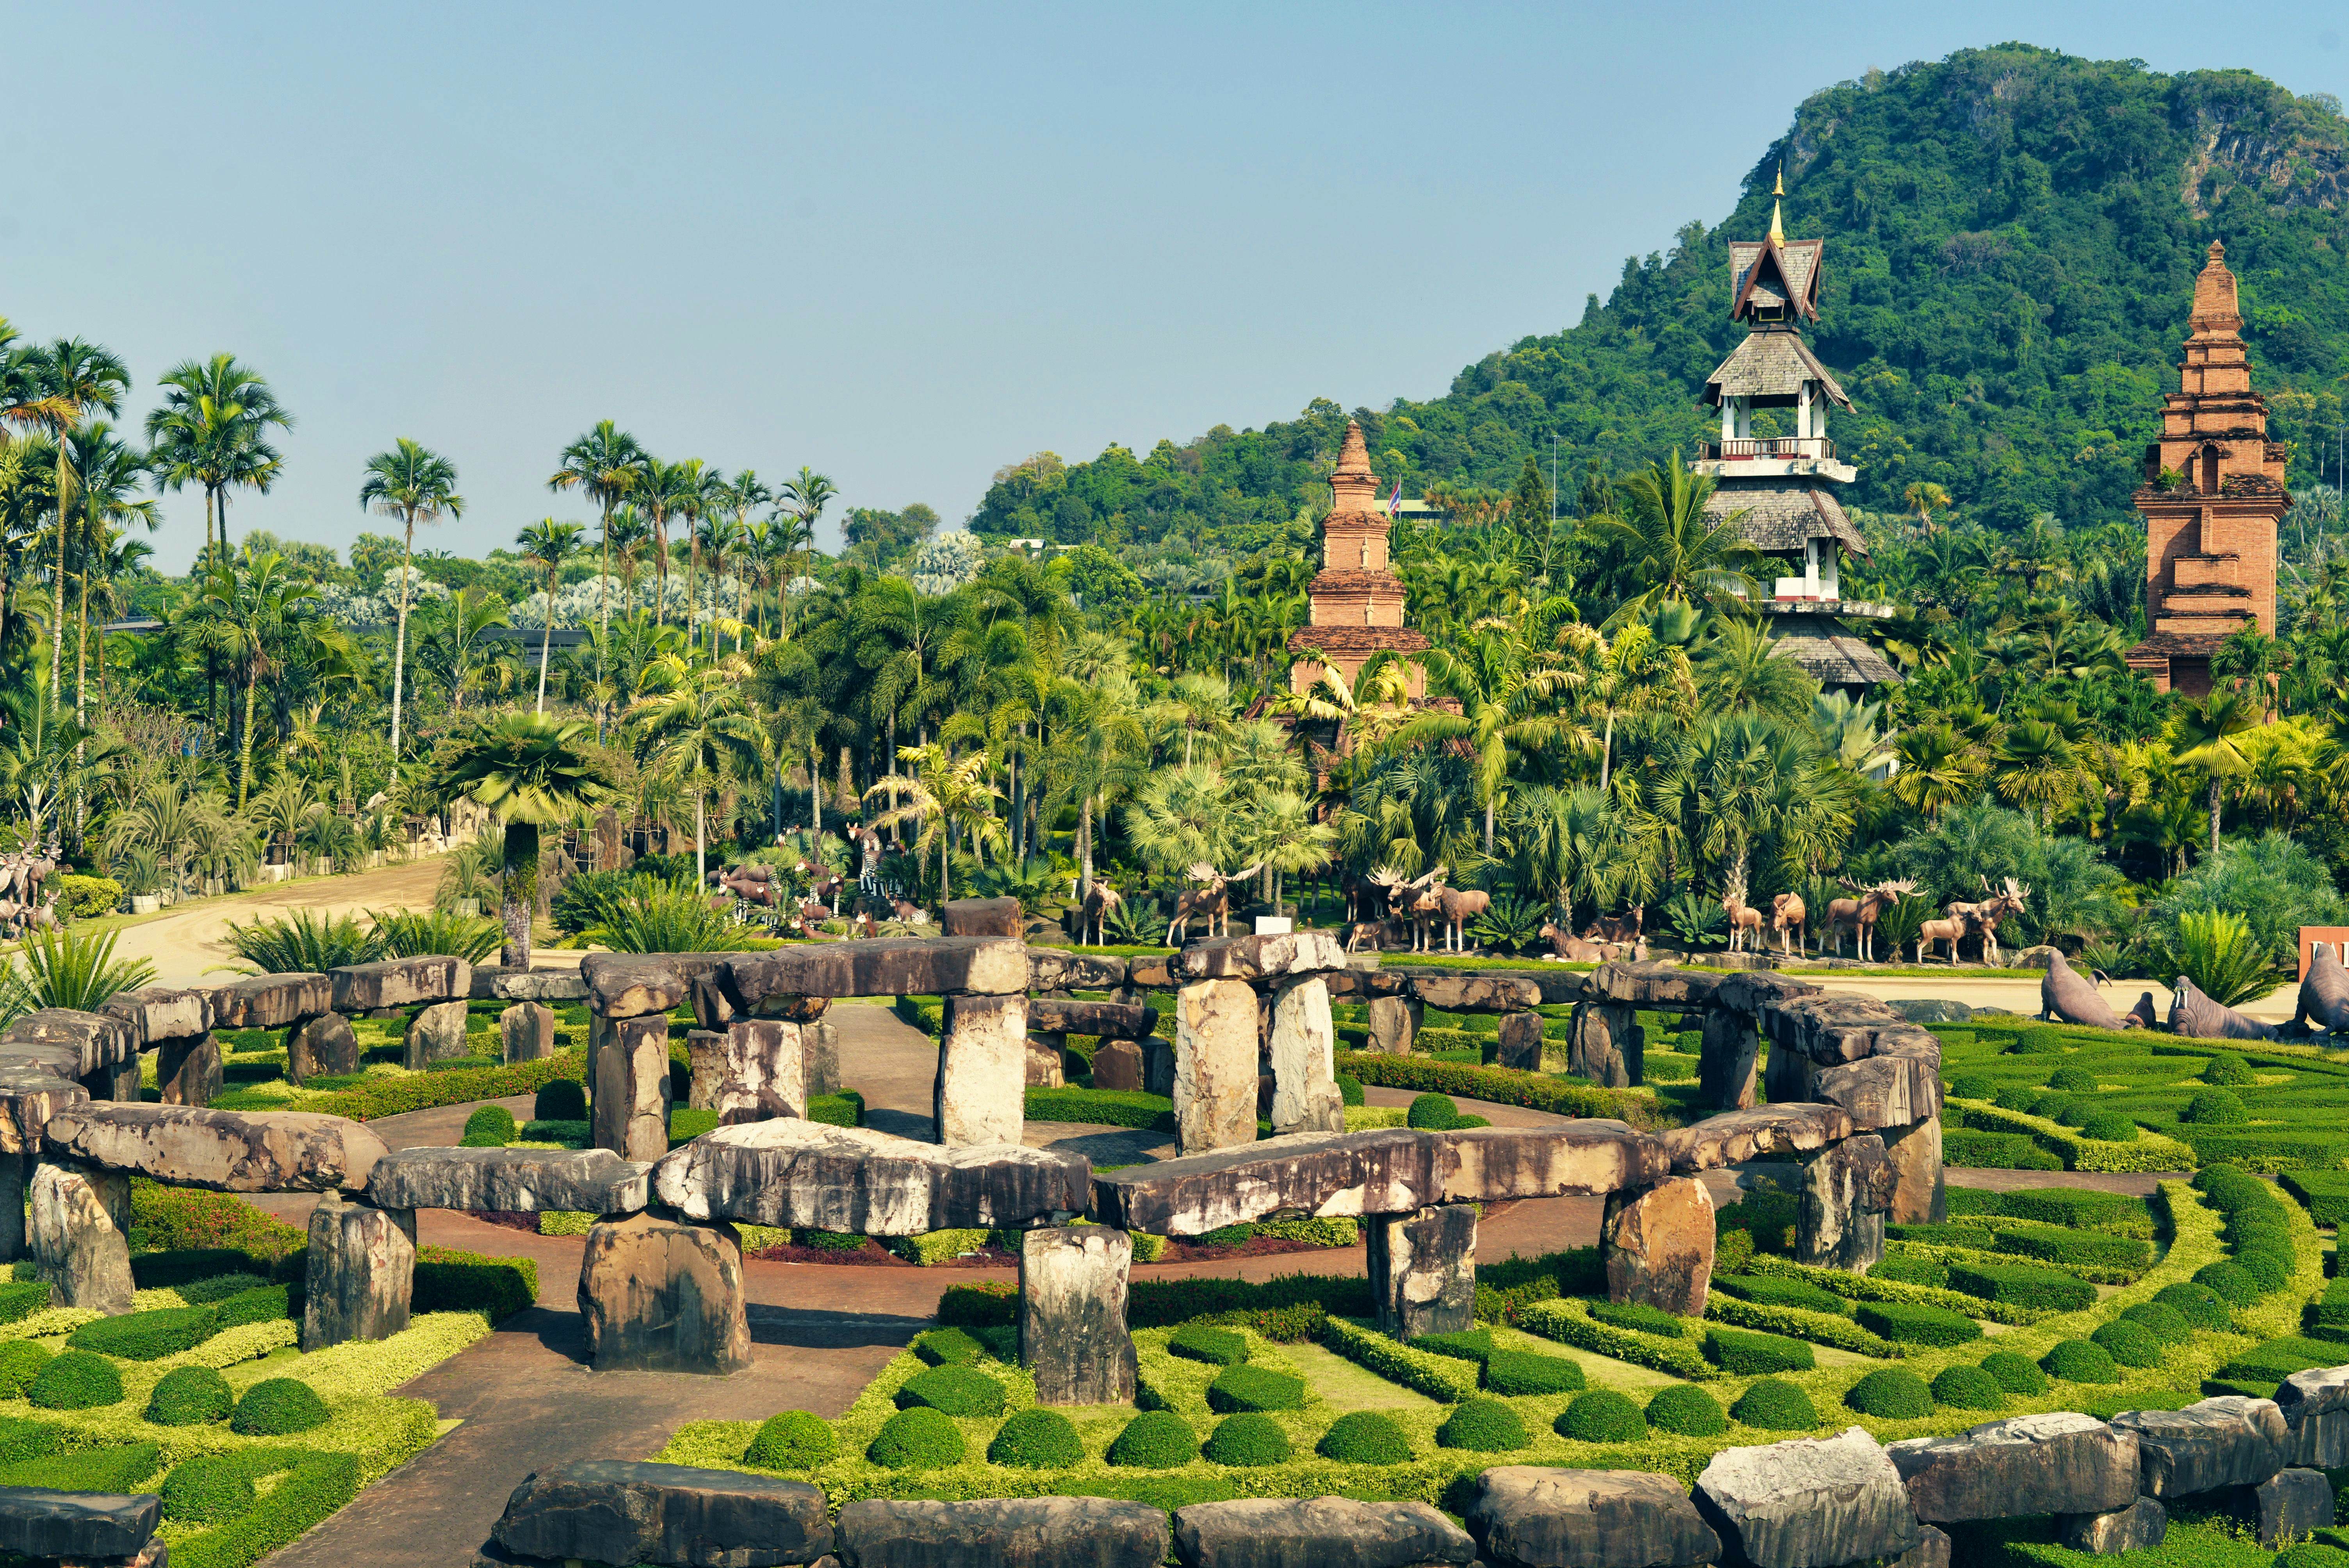 Nong Nooch Tropical Garden- Admissions